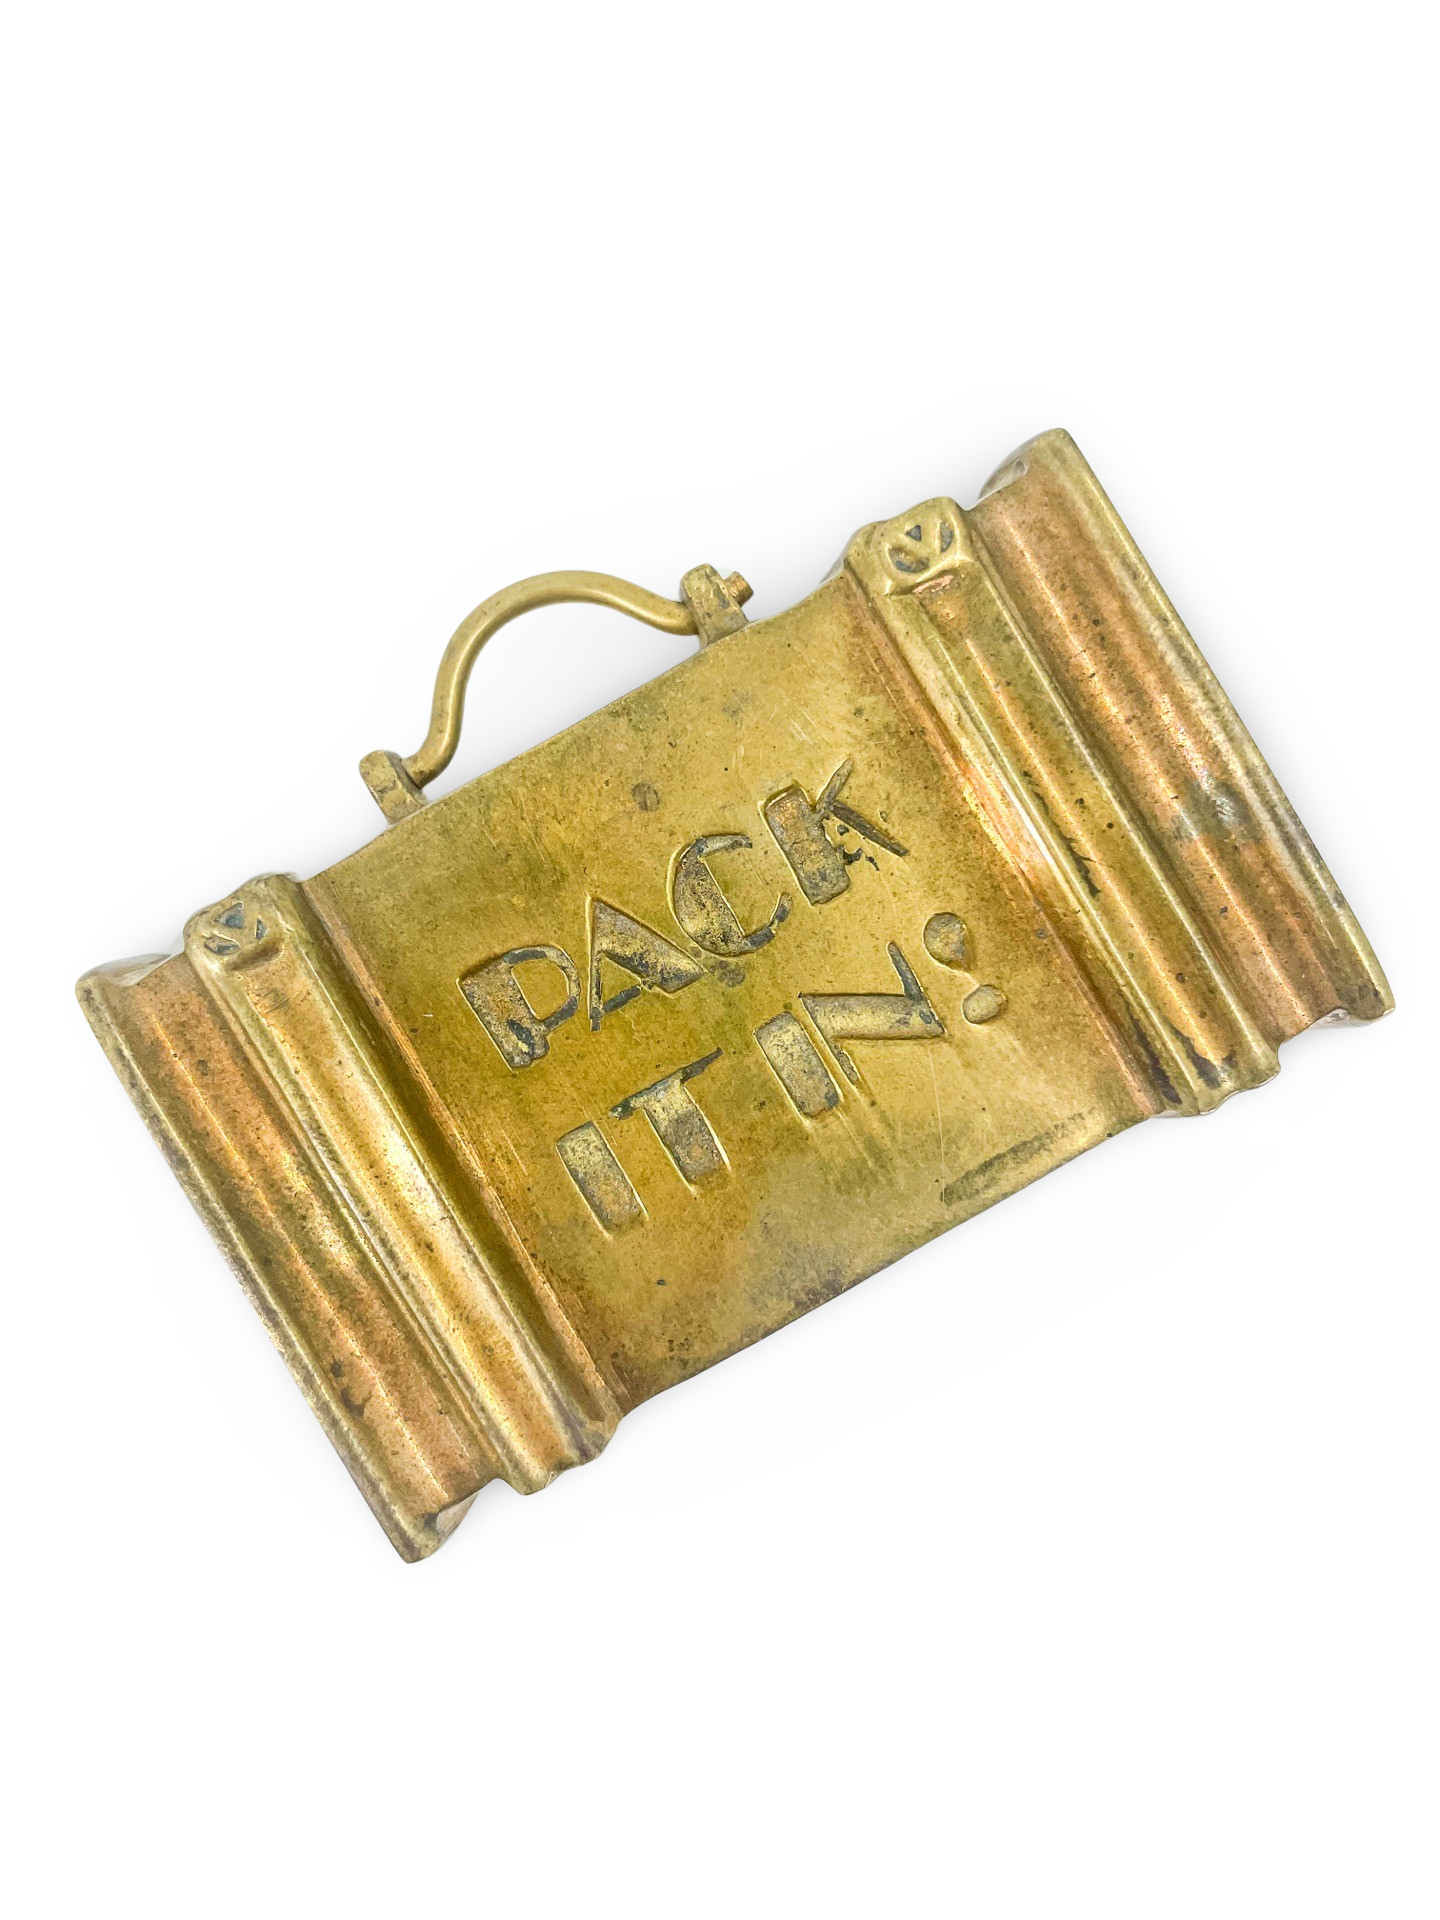 Pack It In! Brass Paperweight